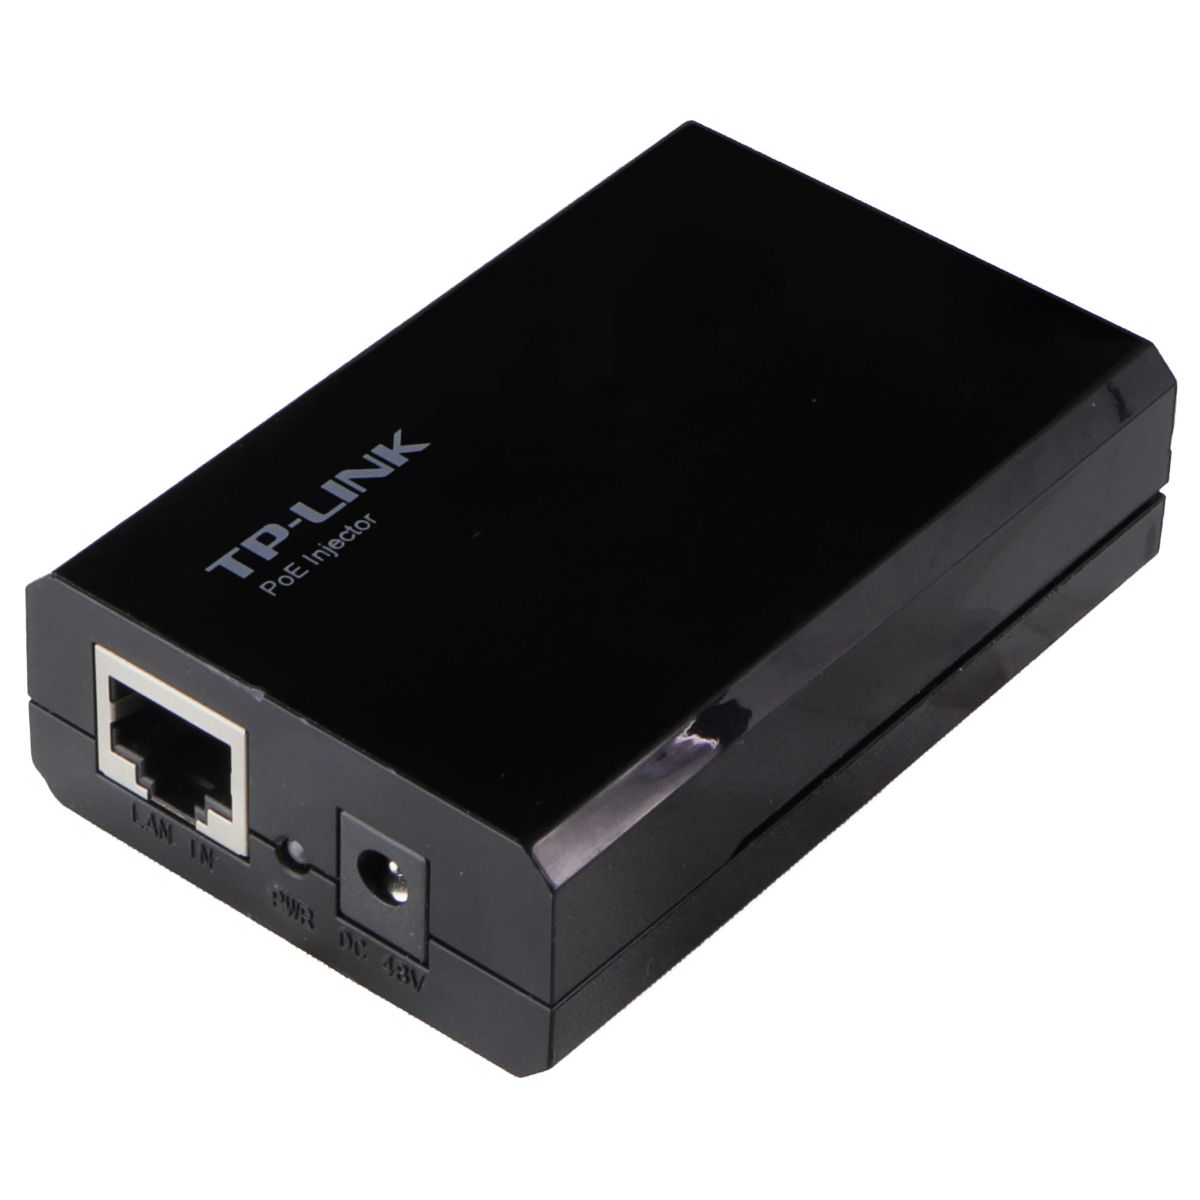 TP-LINK Power over Ethernet (PoE) Injector Adapter Model TL-POE150S - Black Networking - Wired Routers TP-LINK    - Simple Cell Bulk Wholesale Pricing - USA Seller